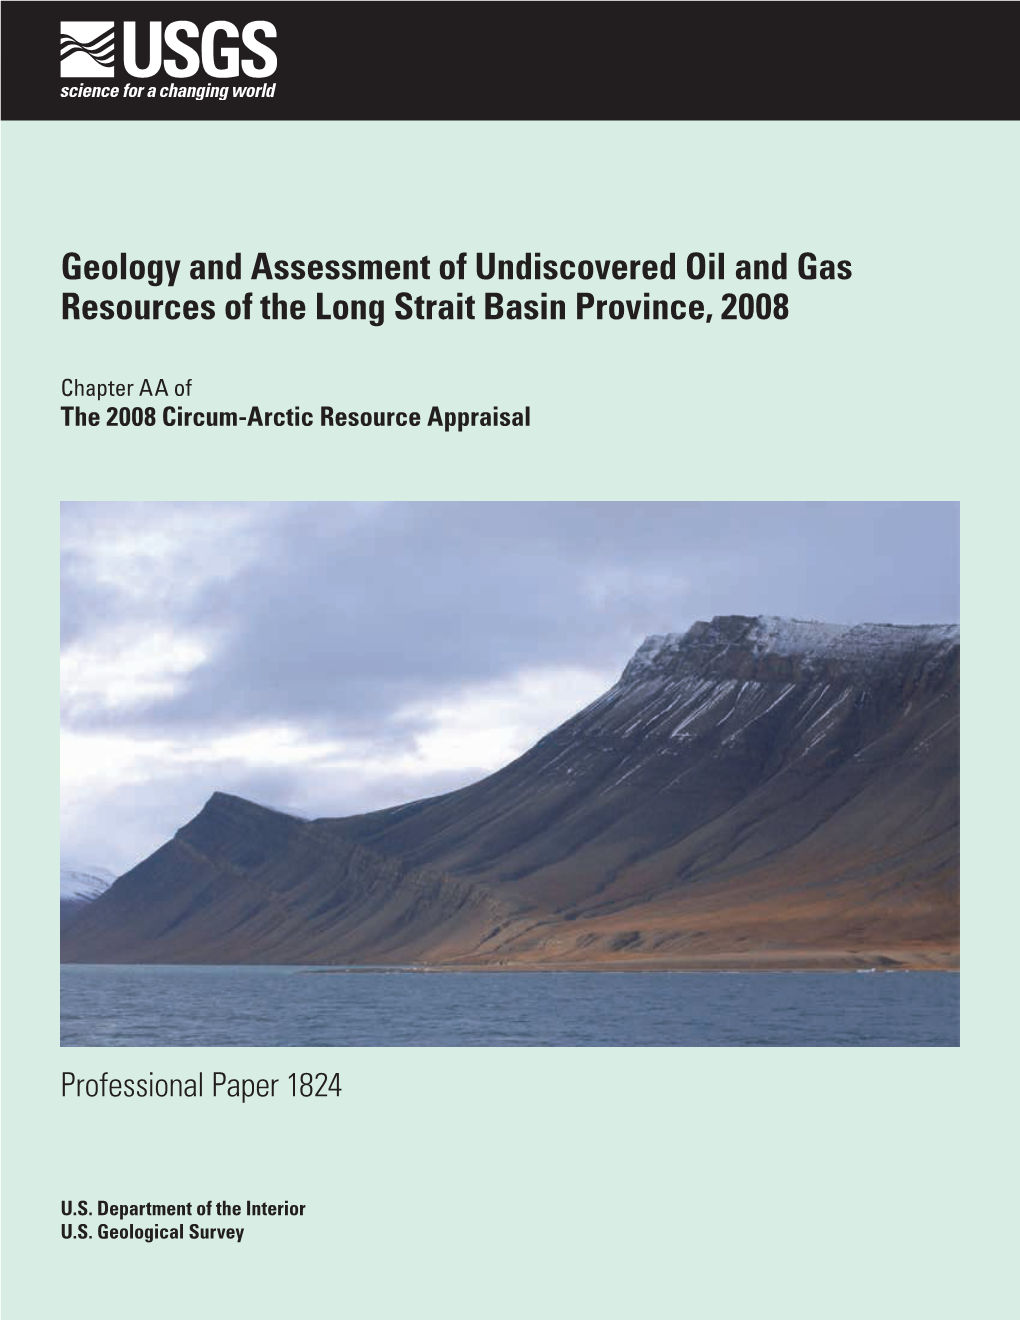 PP 1824-AA: Geology and Assessment of Undiscovered Oil